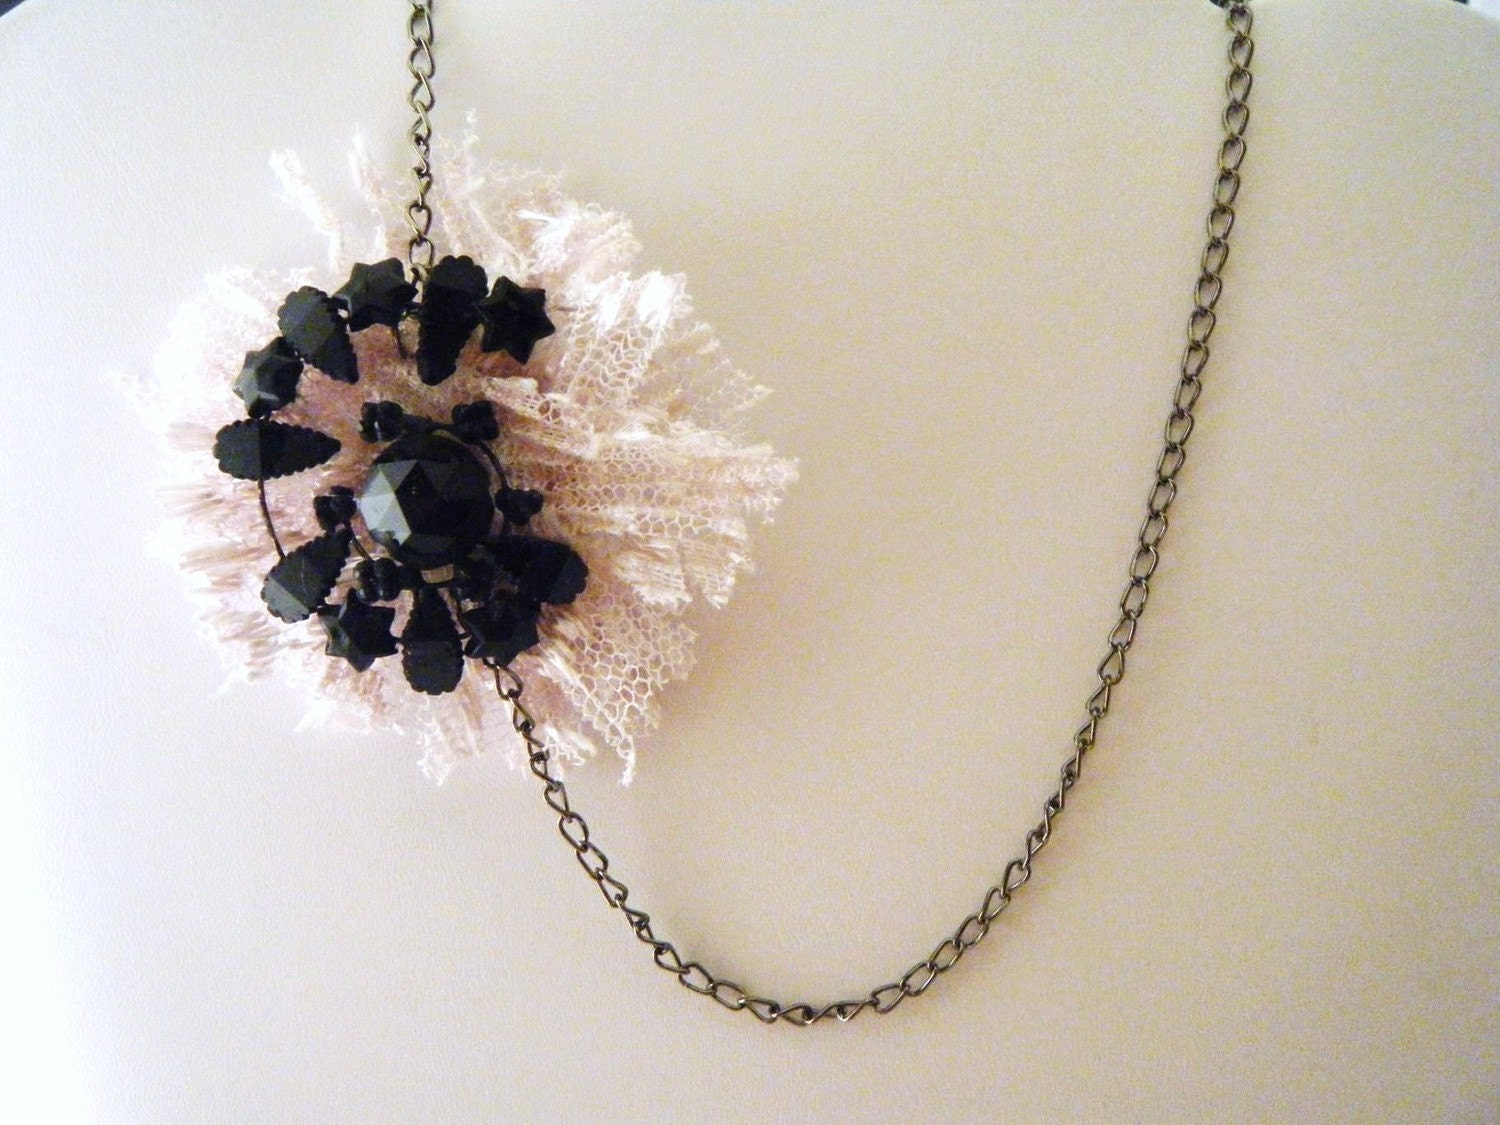 Repurposed Vintage Lace and Celstial Swirl Necklace